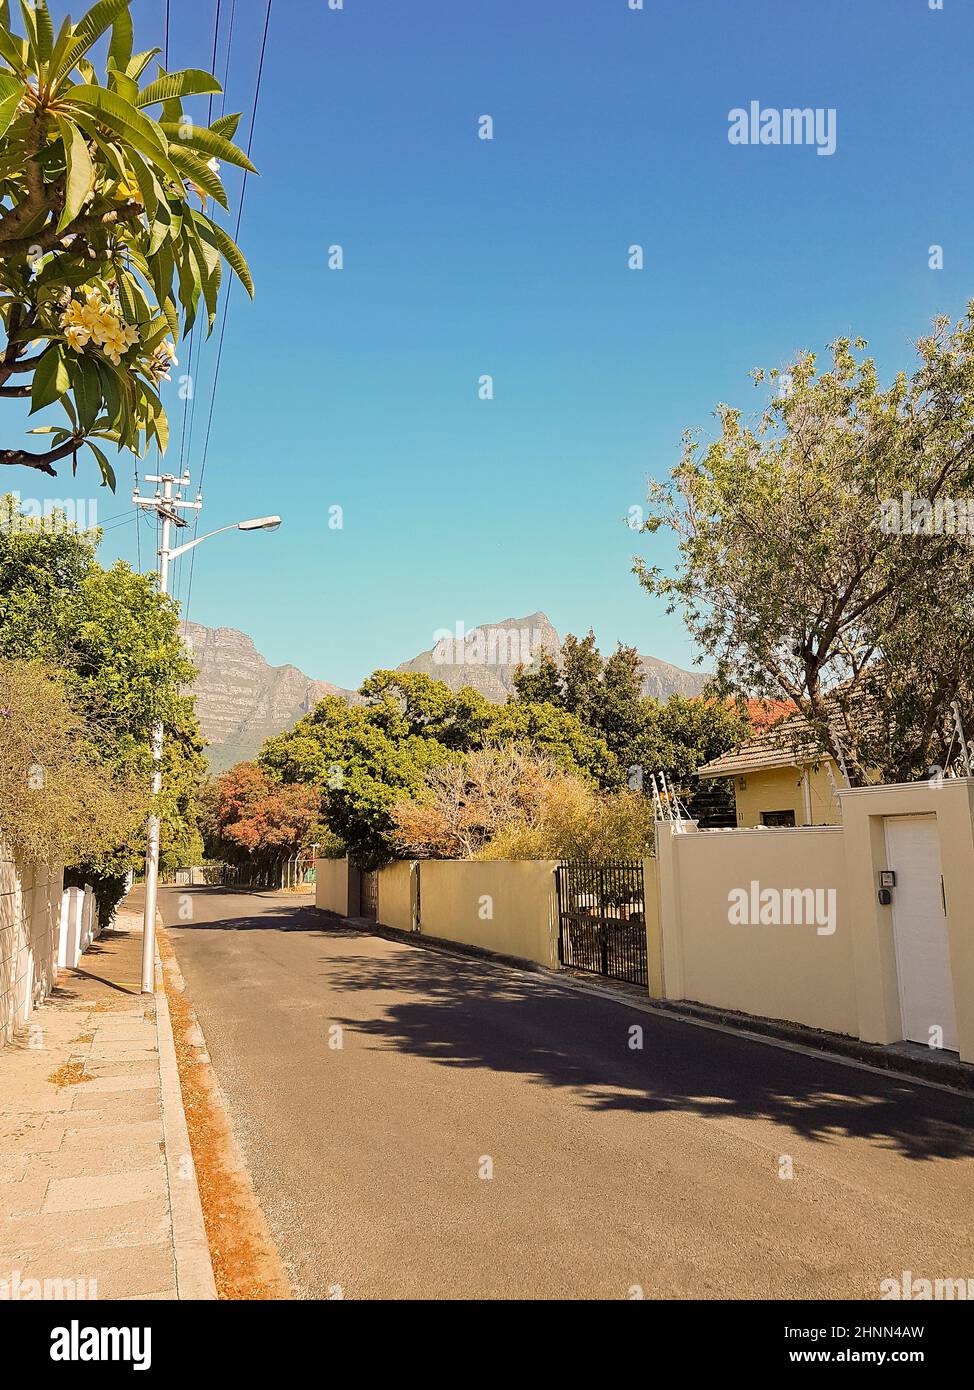 Street in Claremont, Cape Town, South Africa. Sunny weather. Stock Photo